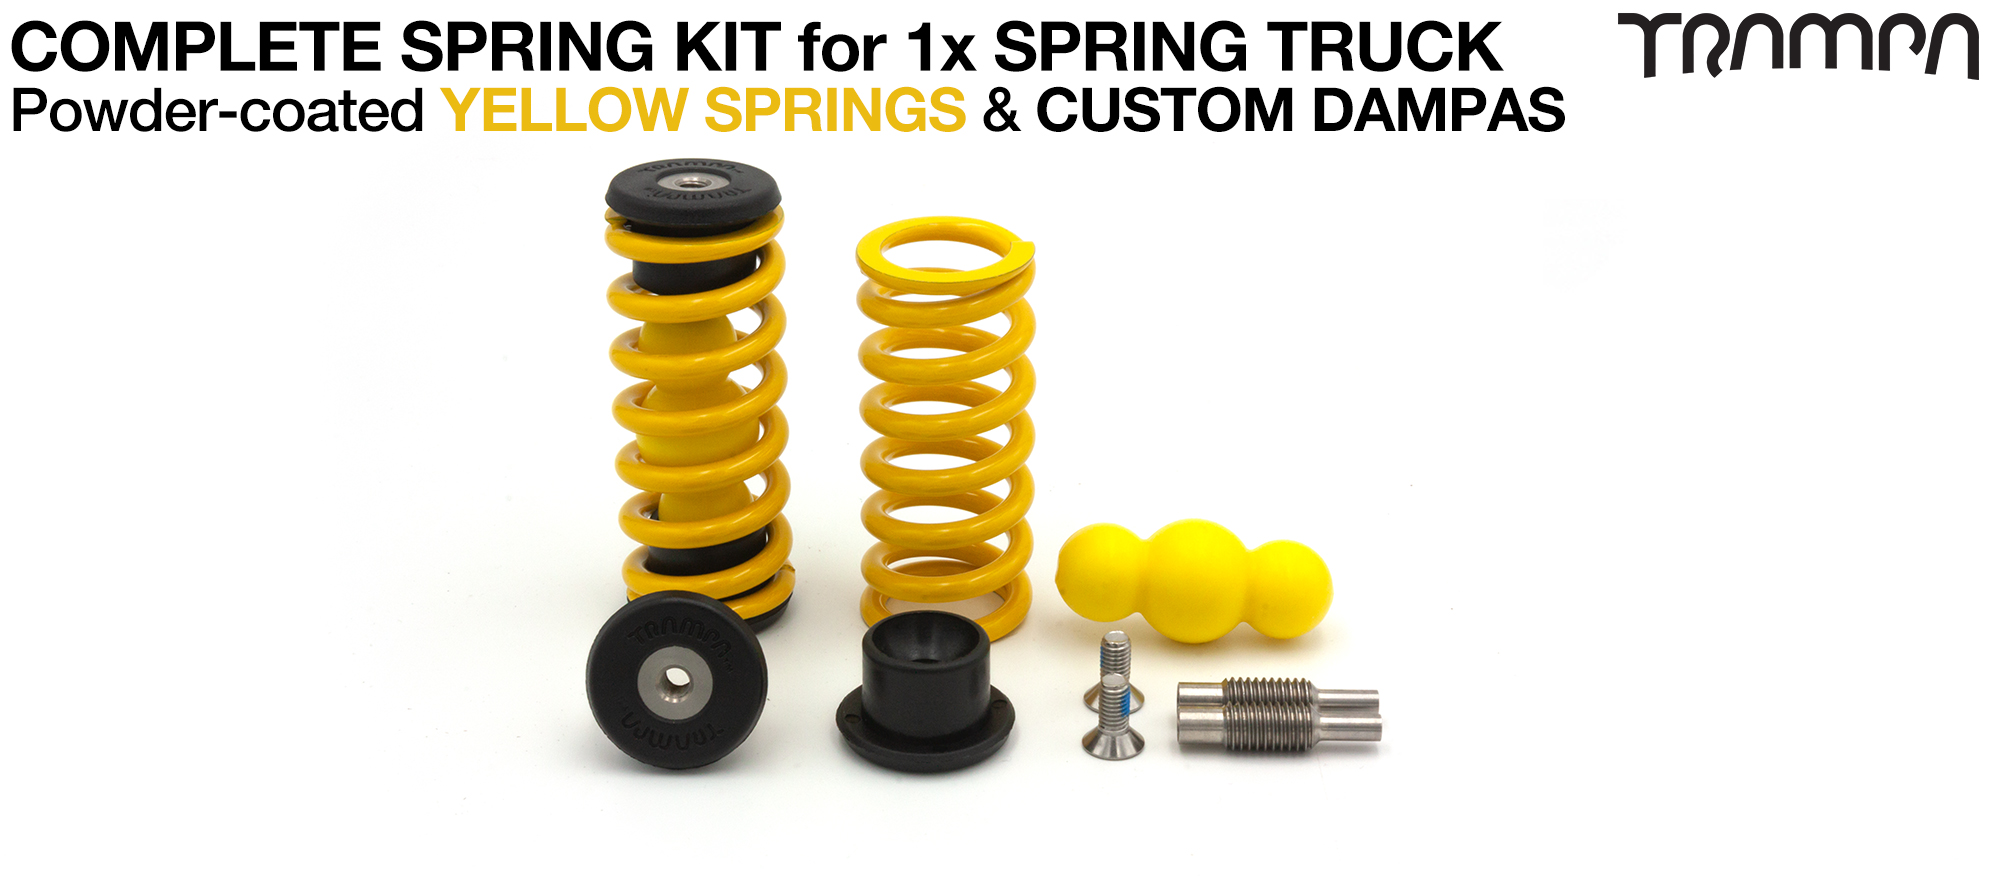 Powder Coated Springs - YELLOW 